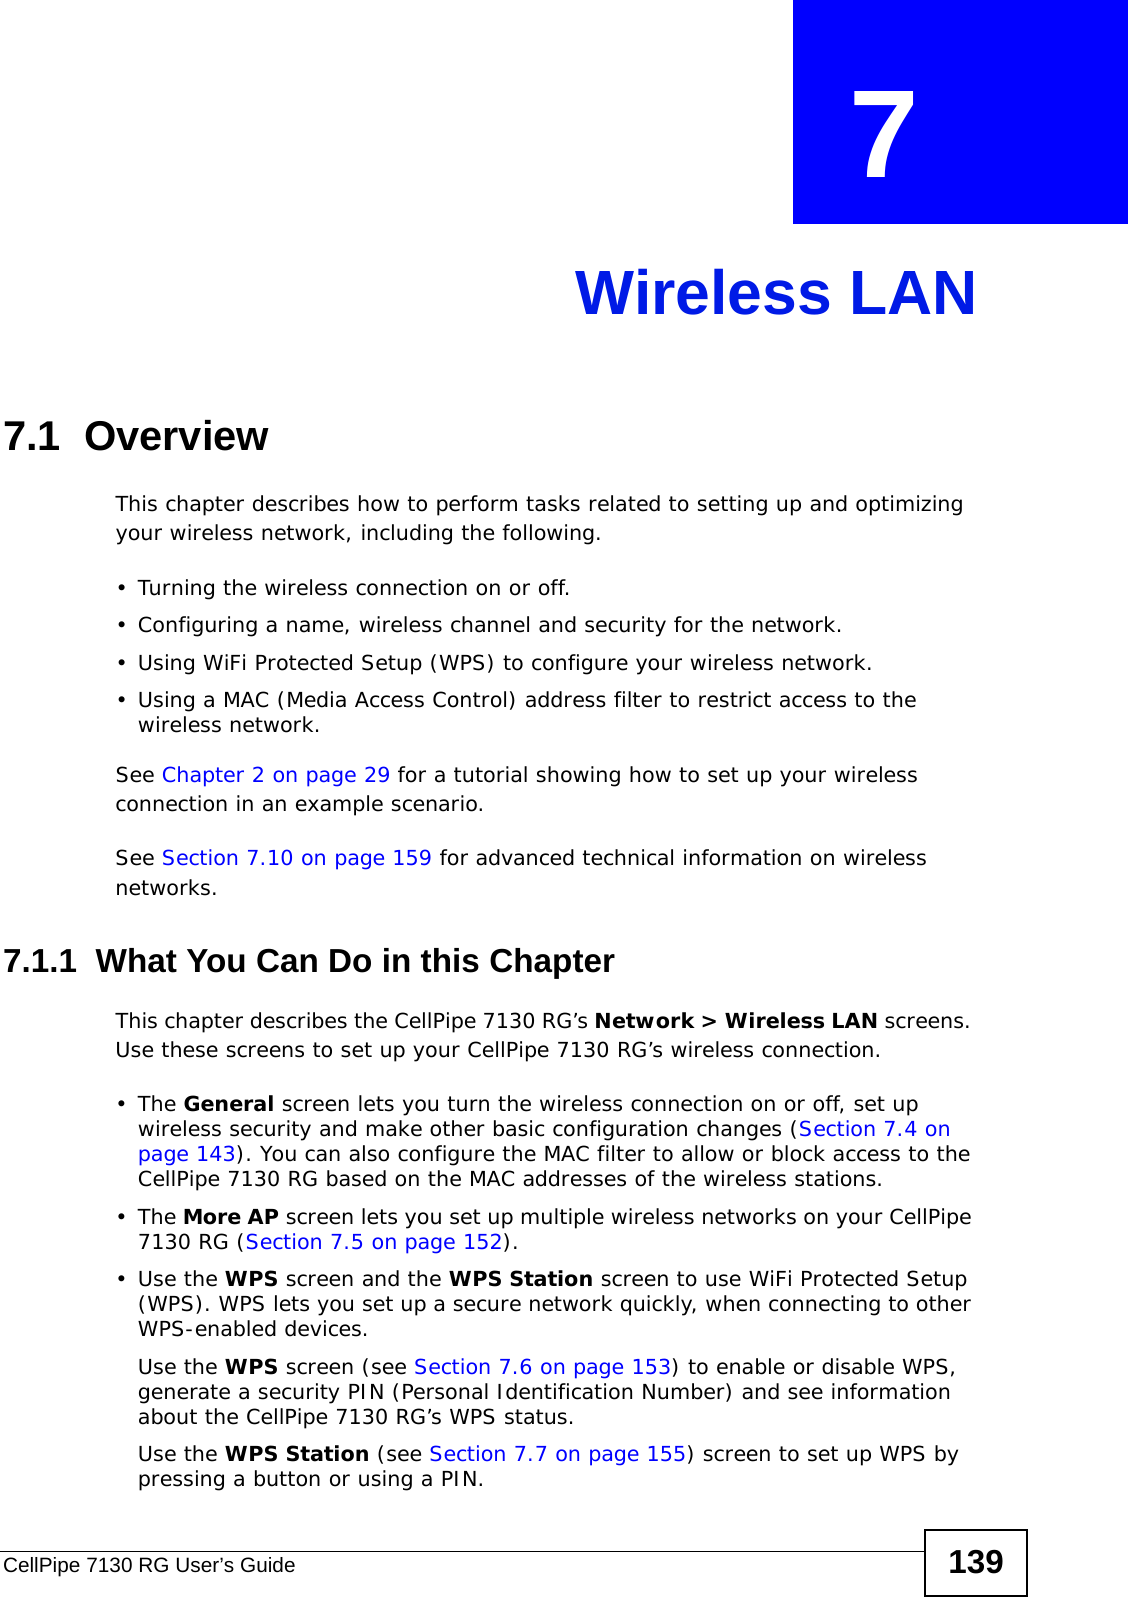 CellPipe 7130 RG User’s Guide 139CHAPTER  7 Wireless LAN7.1  Overview This chapter describes how to perform tasks related to setting up and optimizing your wireless network, including the following.• Turning the wireless connection on or off.• Configuring a name, wireless channel and security for the network.• Using WiFi Protected Setup (WPS) to configure your wireless network.• Using a MAC (Media Access Control) address filter to restrict access to the wireless network.See Chapter 2 on page 29 for a tutorial showing how to set up your wireless connection in an example scenario.See Section 7.10 on page 159 for advanced technical information on wireless networks.7.1.1  What You Can Do in this ChapterThis chapter describes the CellPipe 7130 RG’s Network &gt; Wireless LAN screens. Use these screens to set up your CellPipe 7130 RG’s wireless connection.•The General screen lets you turn the wireless connection on or off, set up wireless security and make other basic configuration changes (Section 7.4 on page 143). You can also configure the MAC filter to allow or block access to the CellPipe 7130 RG based on the MAC addresses of the wireless stations.•The More AP screen lets you set up multiple wireless networks on your CellPipe 7130 RG (Section 7.5 on page 152).•Use the WPS screen and the WPS Station screen to use WiFi Protected Setup (WPS). WPS lets you set up a secure network quickly, when connecting to other WPS-enabled devices. Use the WPS screen (see Section 7.6 on page 153) to enable or disable WPS, generate a security PIN (Personal Identification Number) and see information about the CellPipe 7130 RG’s WPS status.Use the WPS Station (see Section 7.7 on page 155) screen to set up WPS by pressing a button or using a PIN.